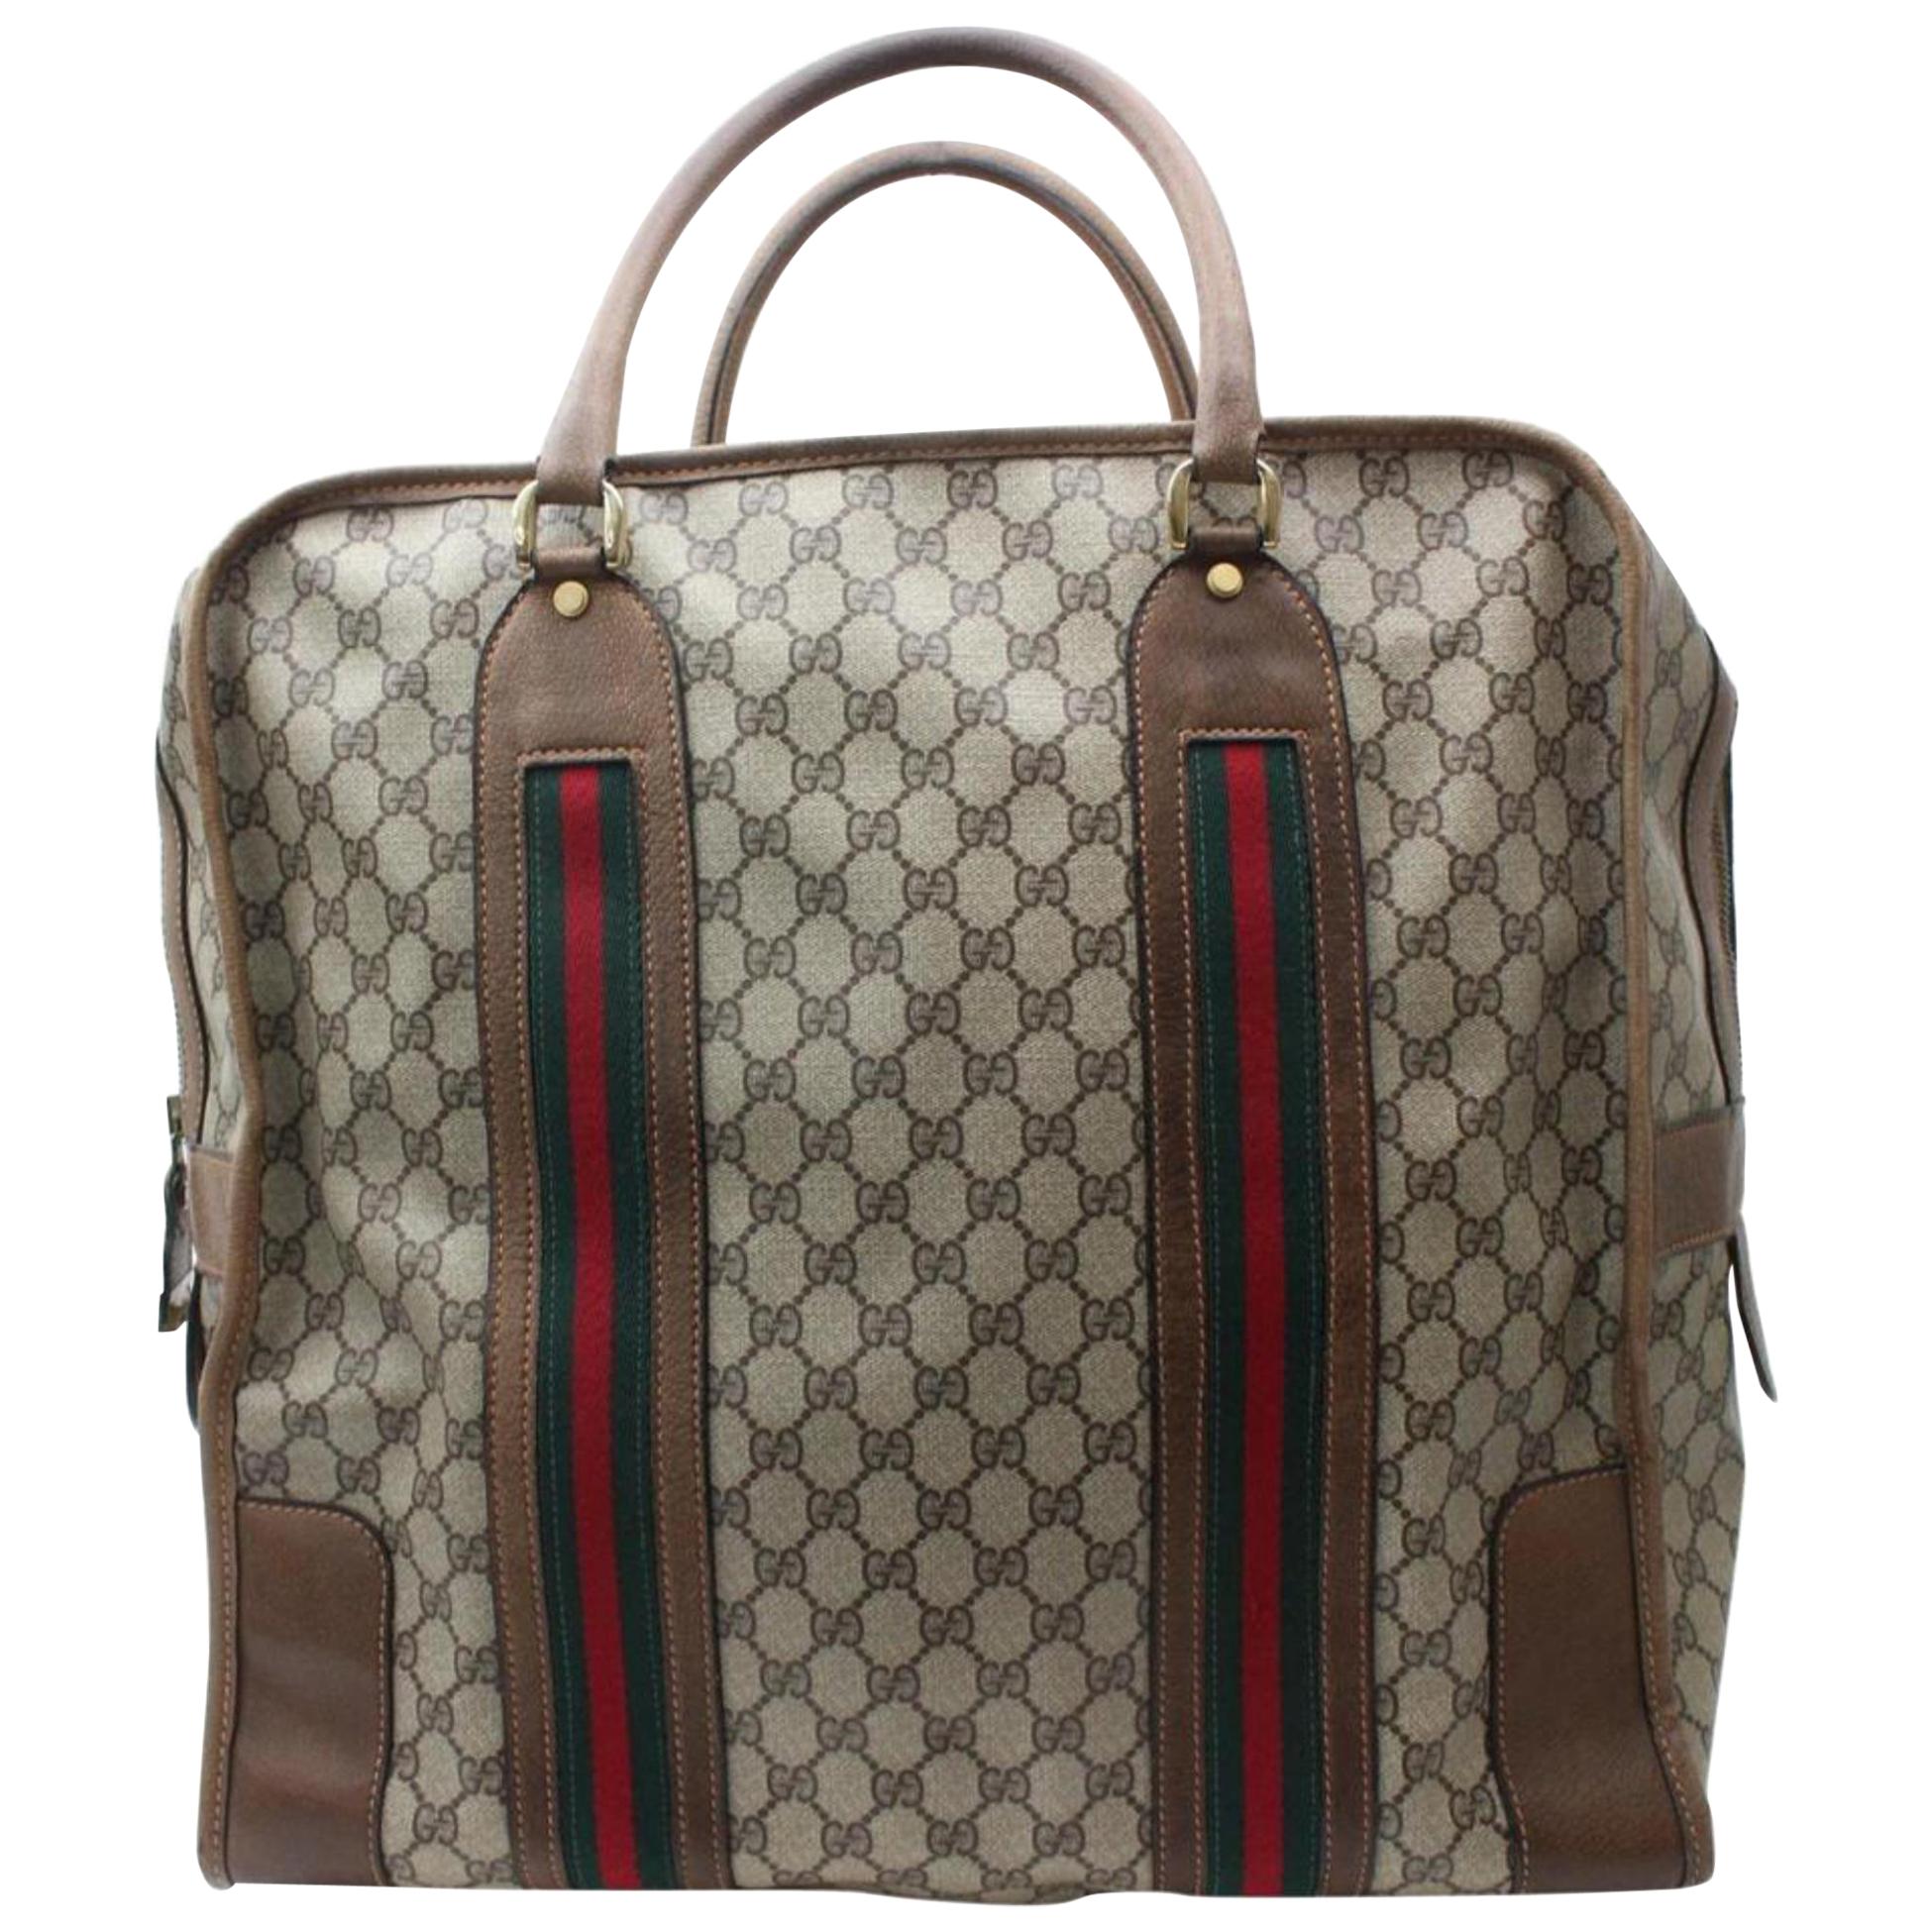 Sold at Auction: Gucci Large Dark Brown Web Boston Leather Bag